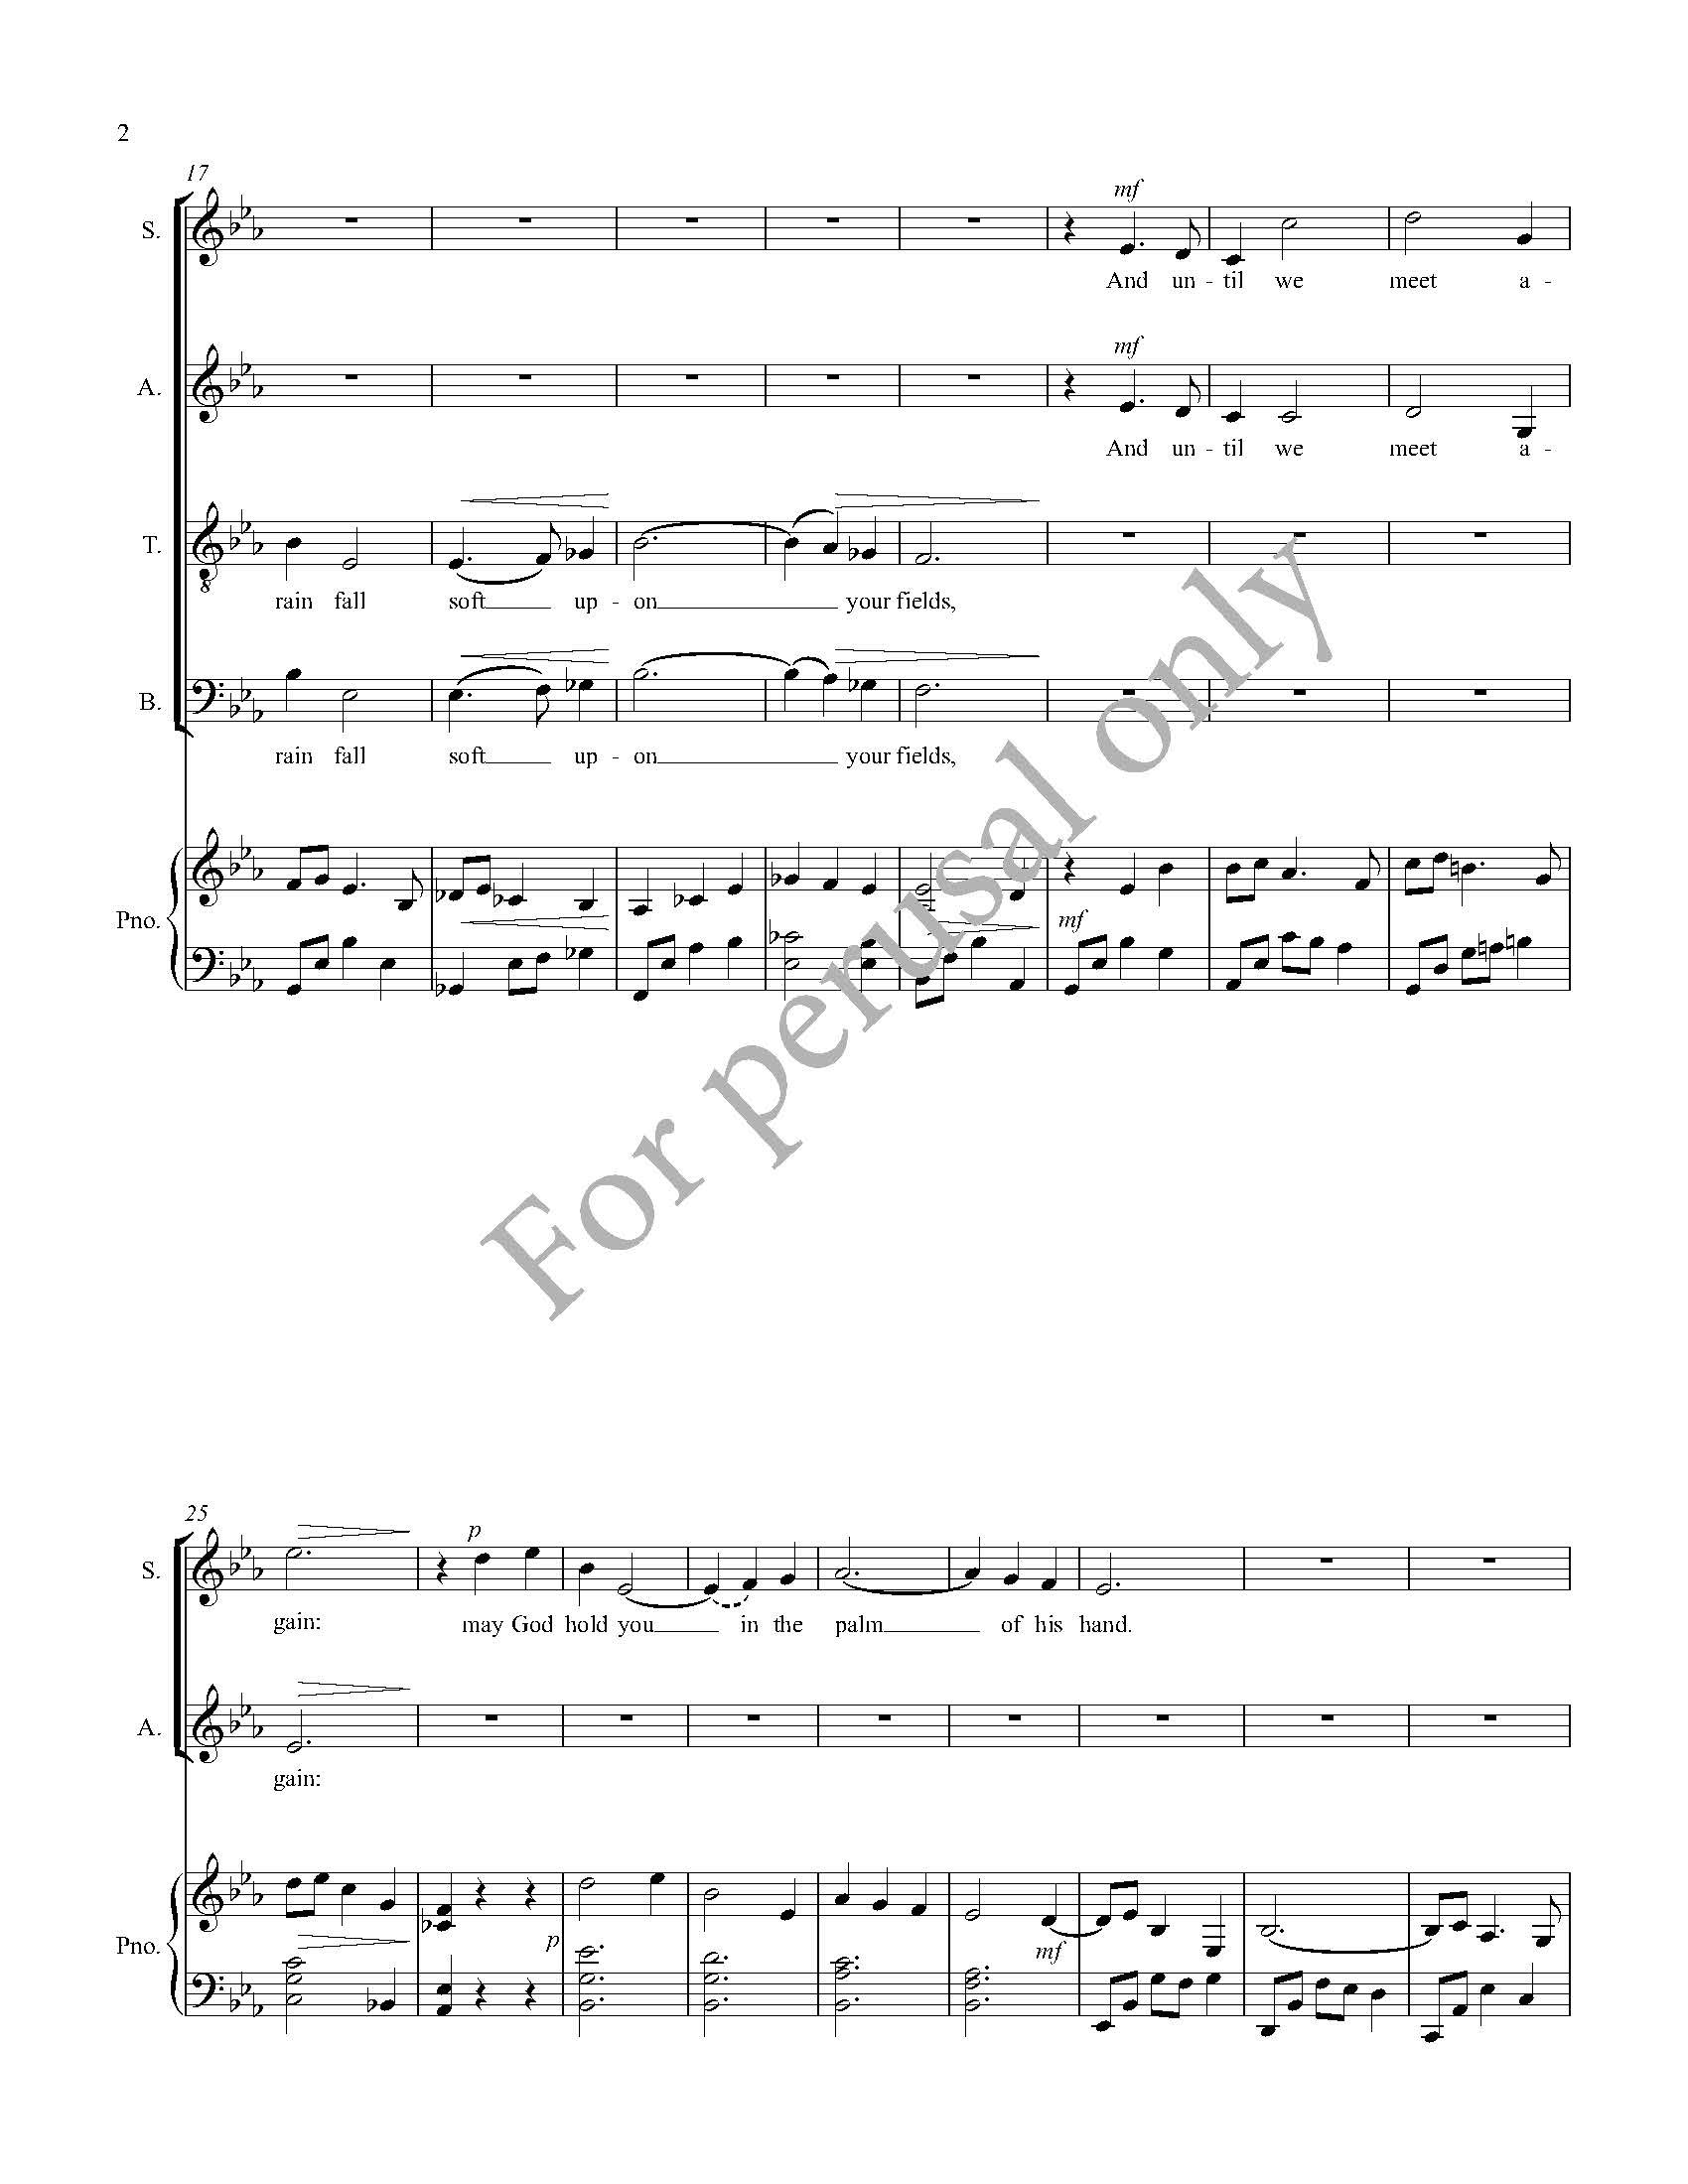 SCORE - preview An Irish Blessing for SATB and piano by Ryan James Brandau_Page_2.jpg